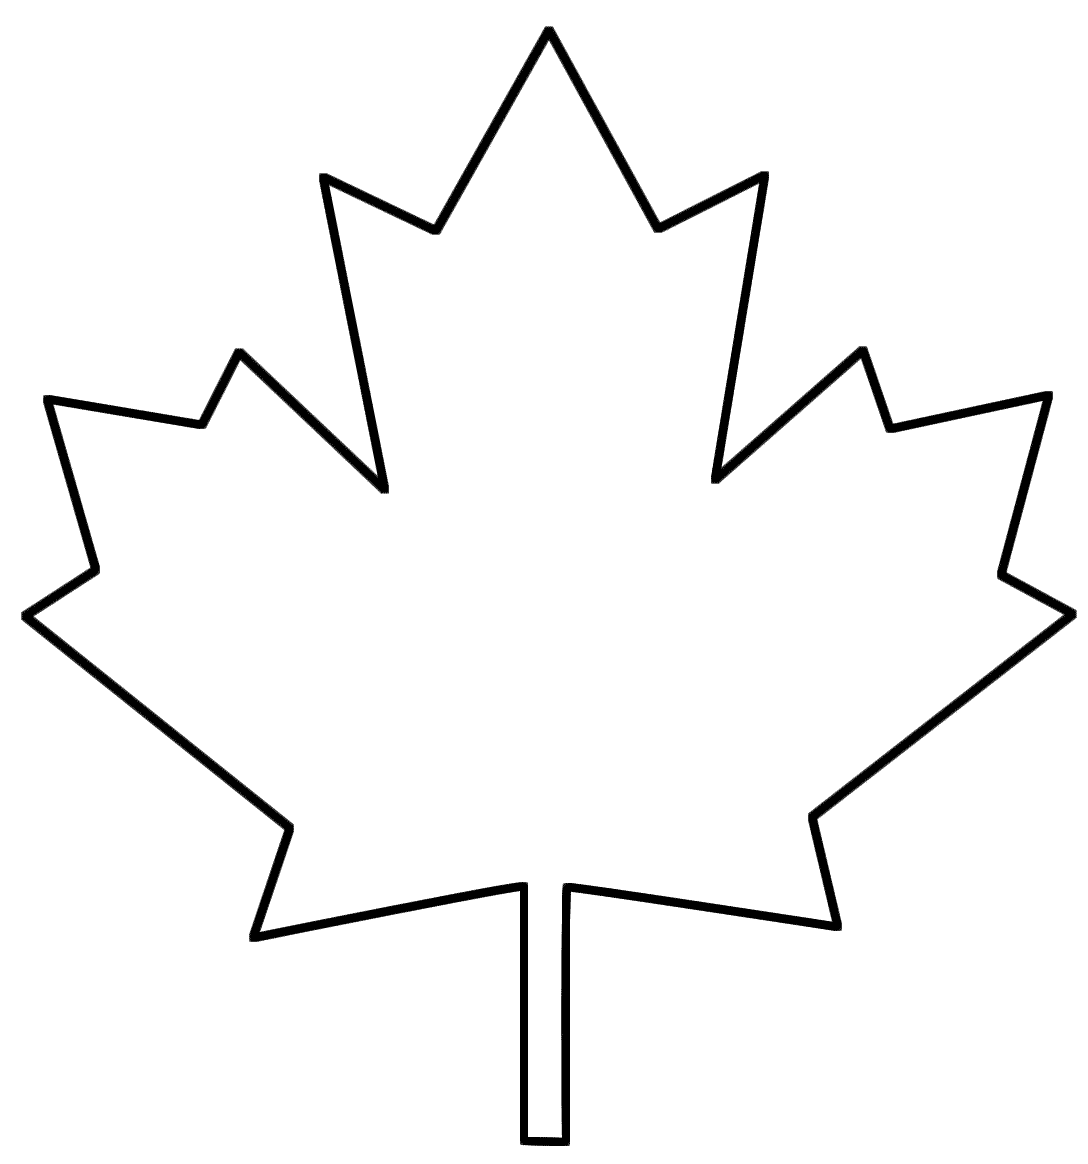 Maple Leaf - Coloring Page (